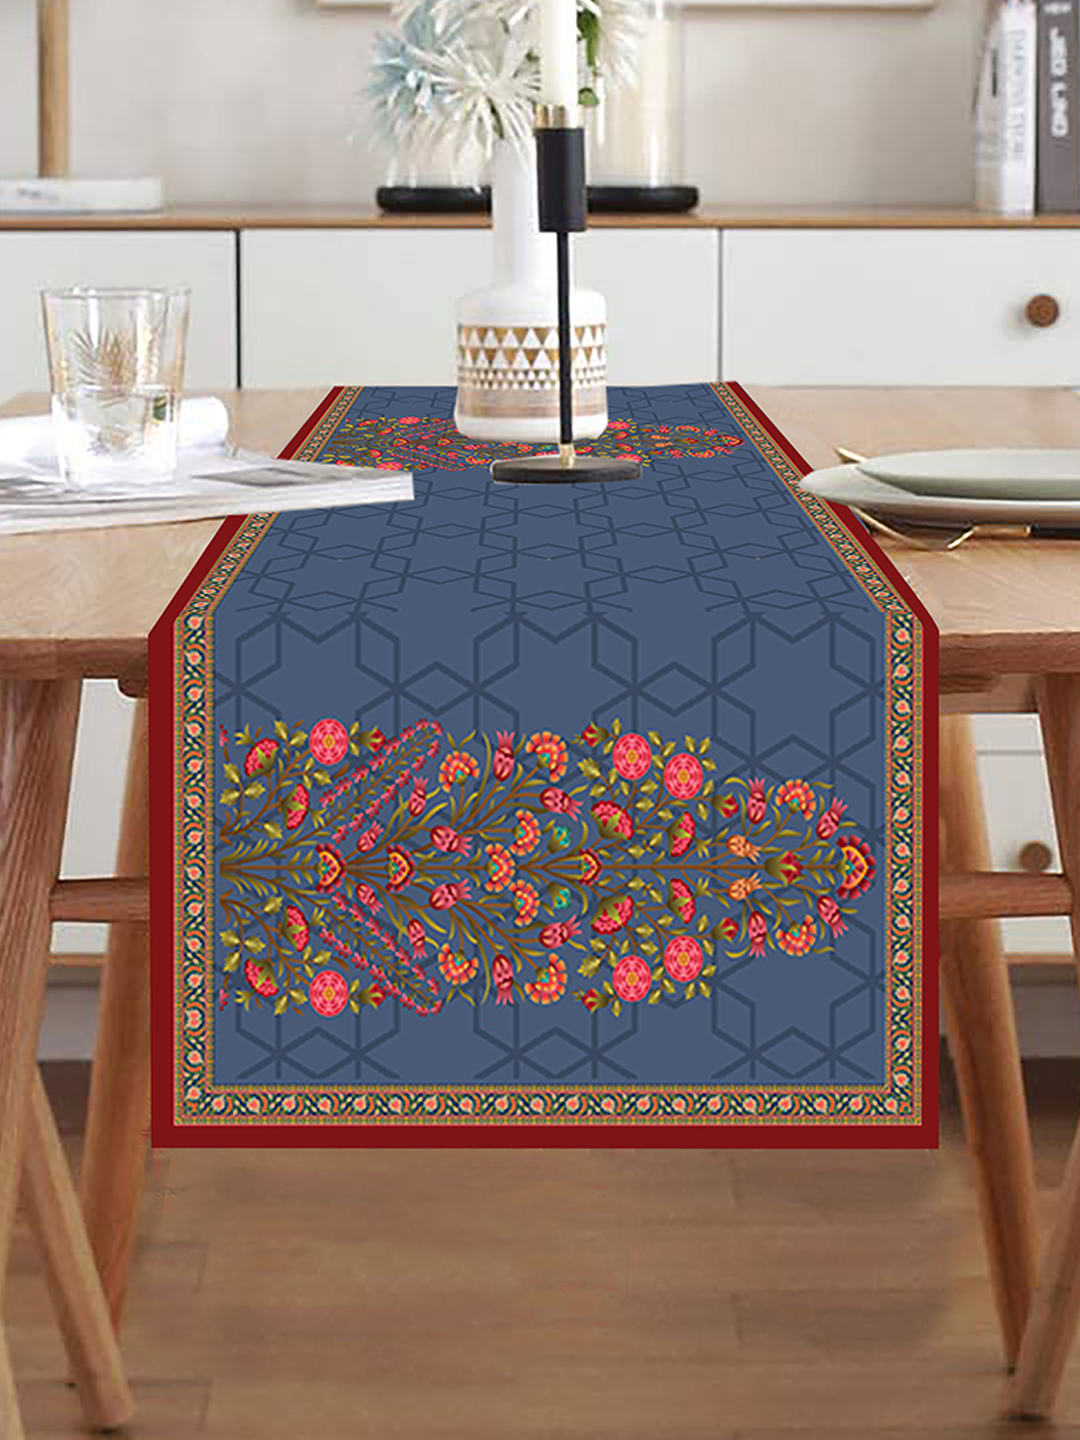 Homewards Mughal Motif with Floral Border Table Runner Navy Blue